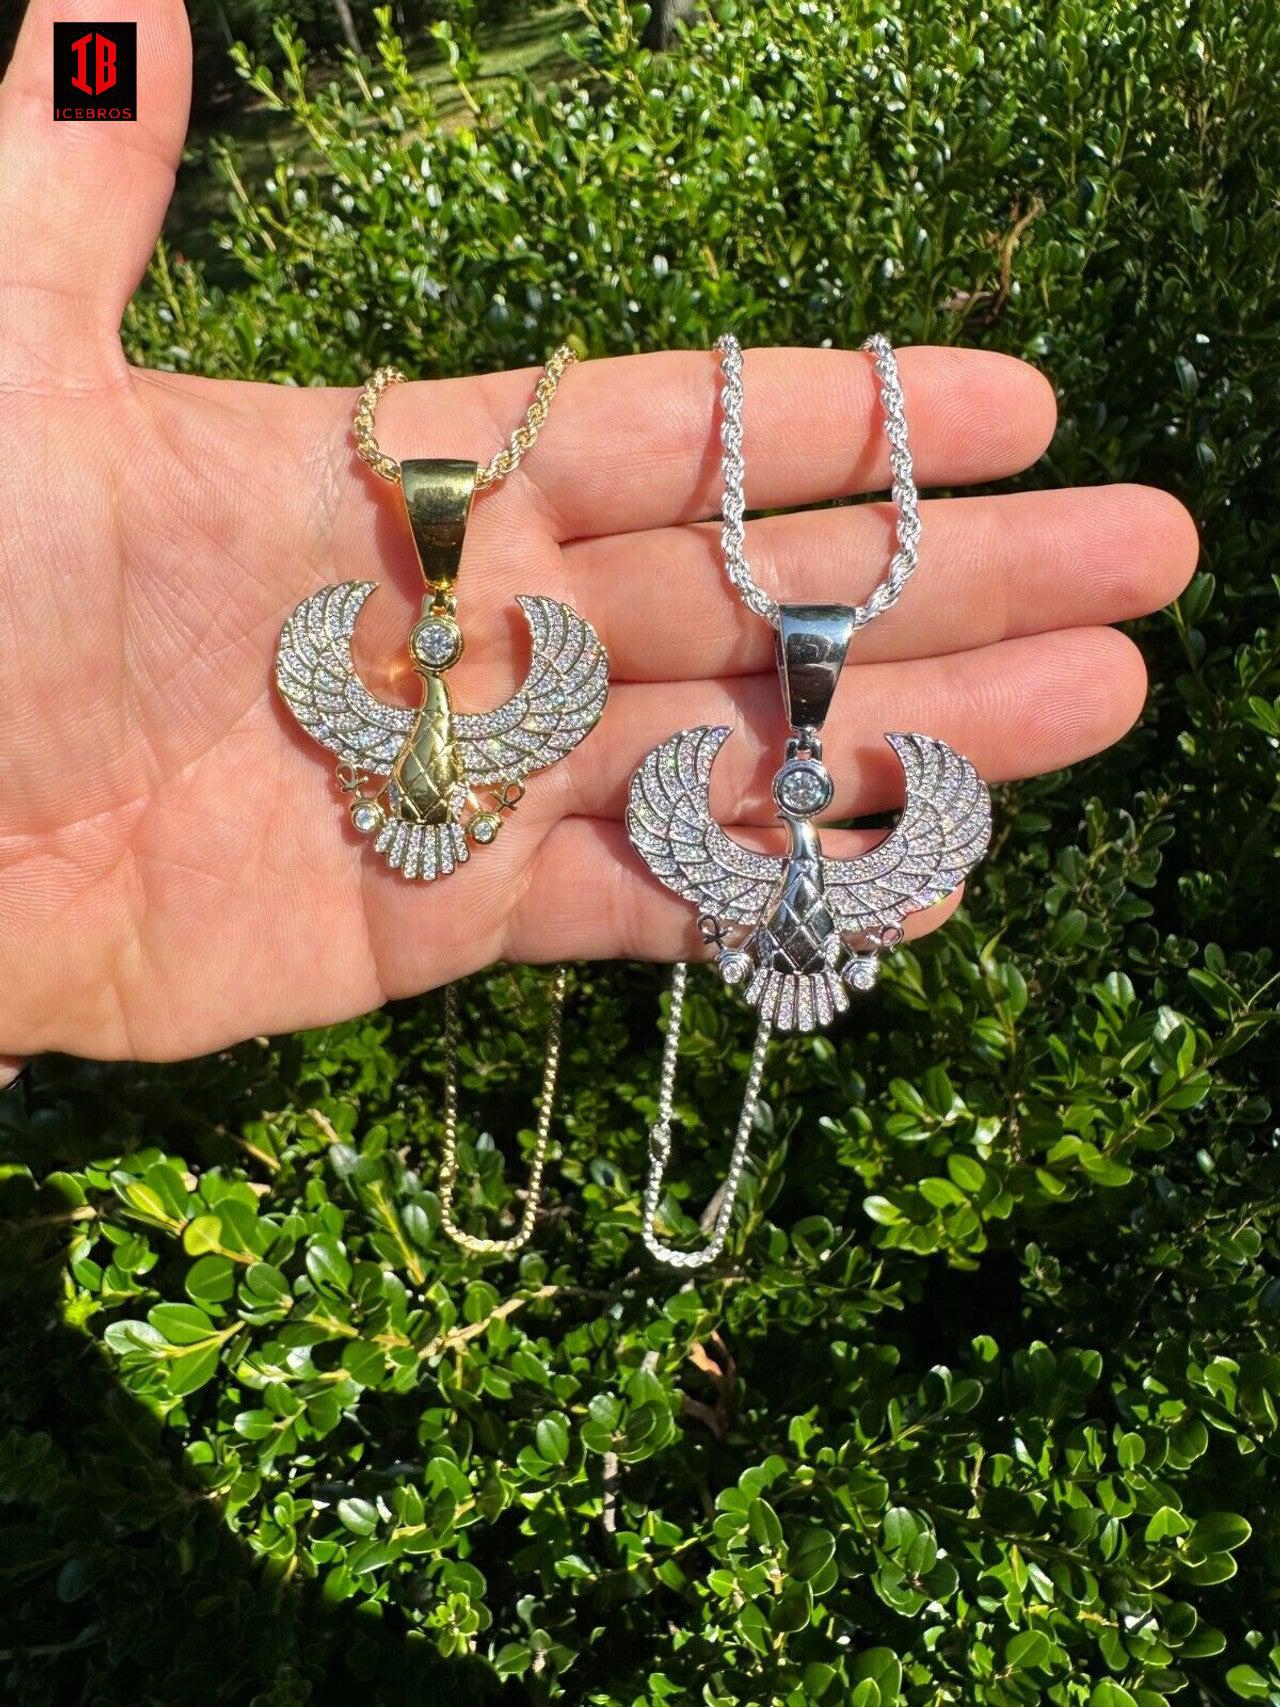 Hand Model Holding 14k Gold Or White Gold  Horus Egyptian Falcon Wing Pendant Necklace With Shinning Vvs Moissanite